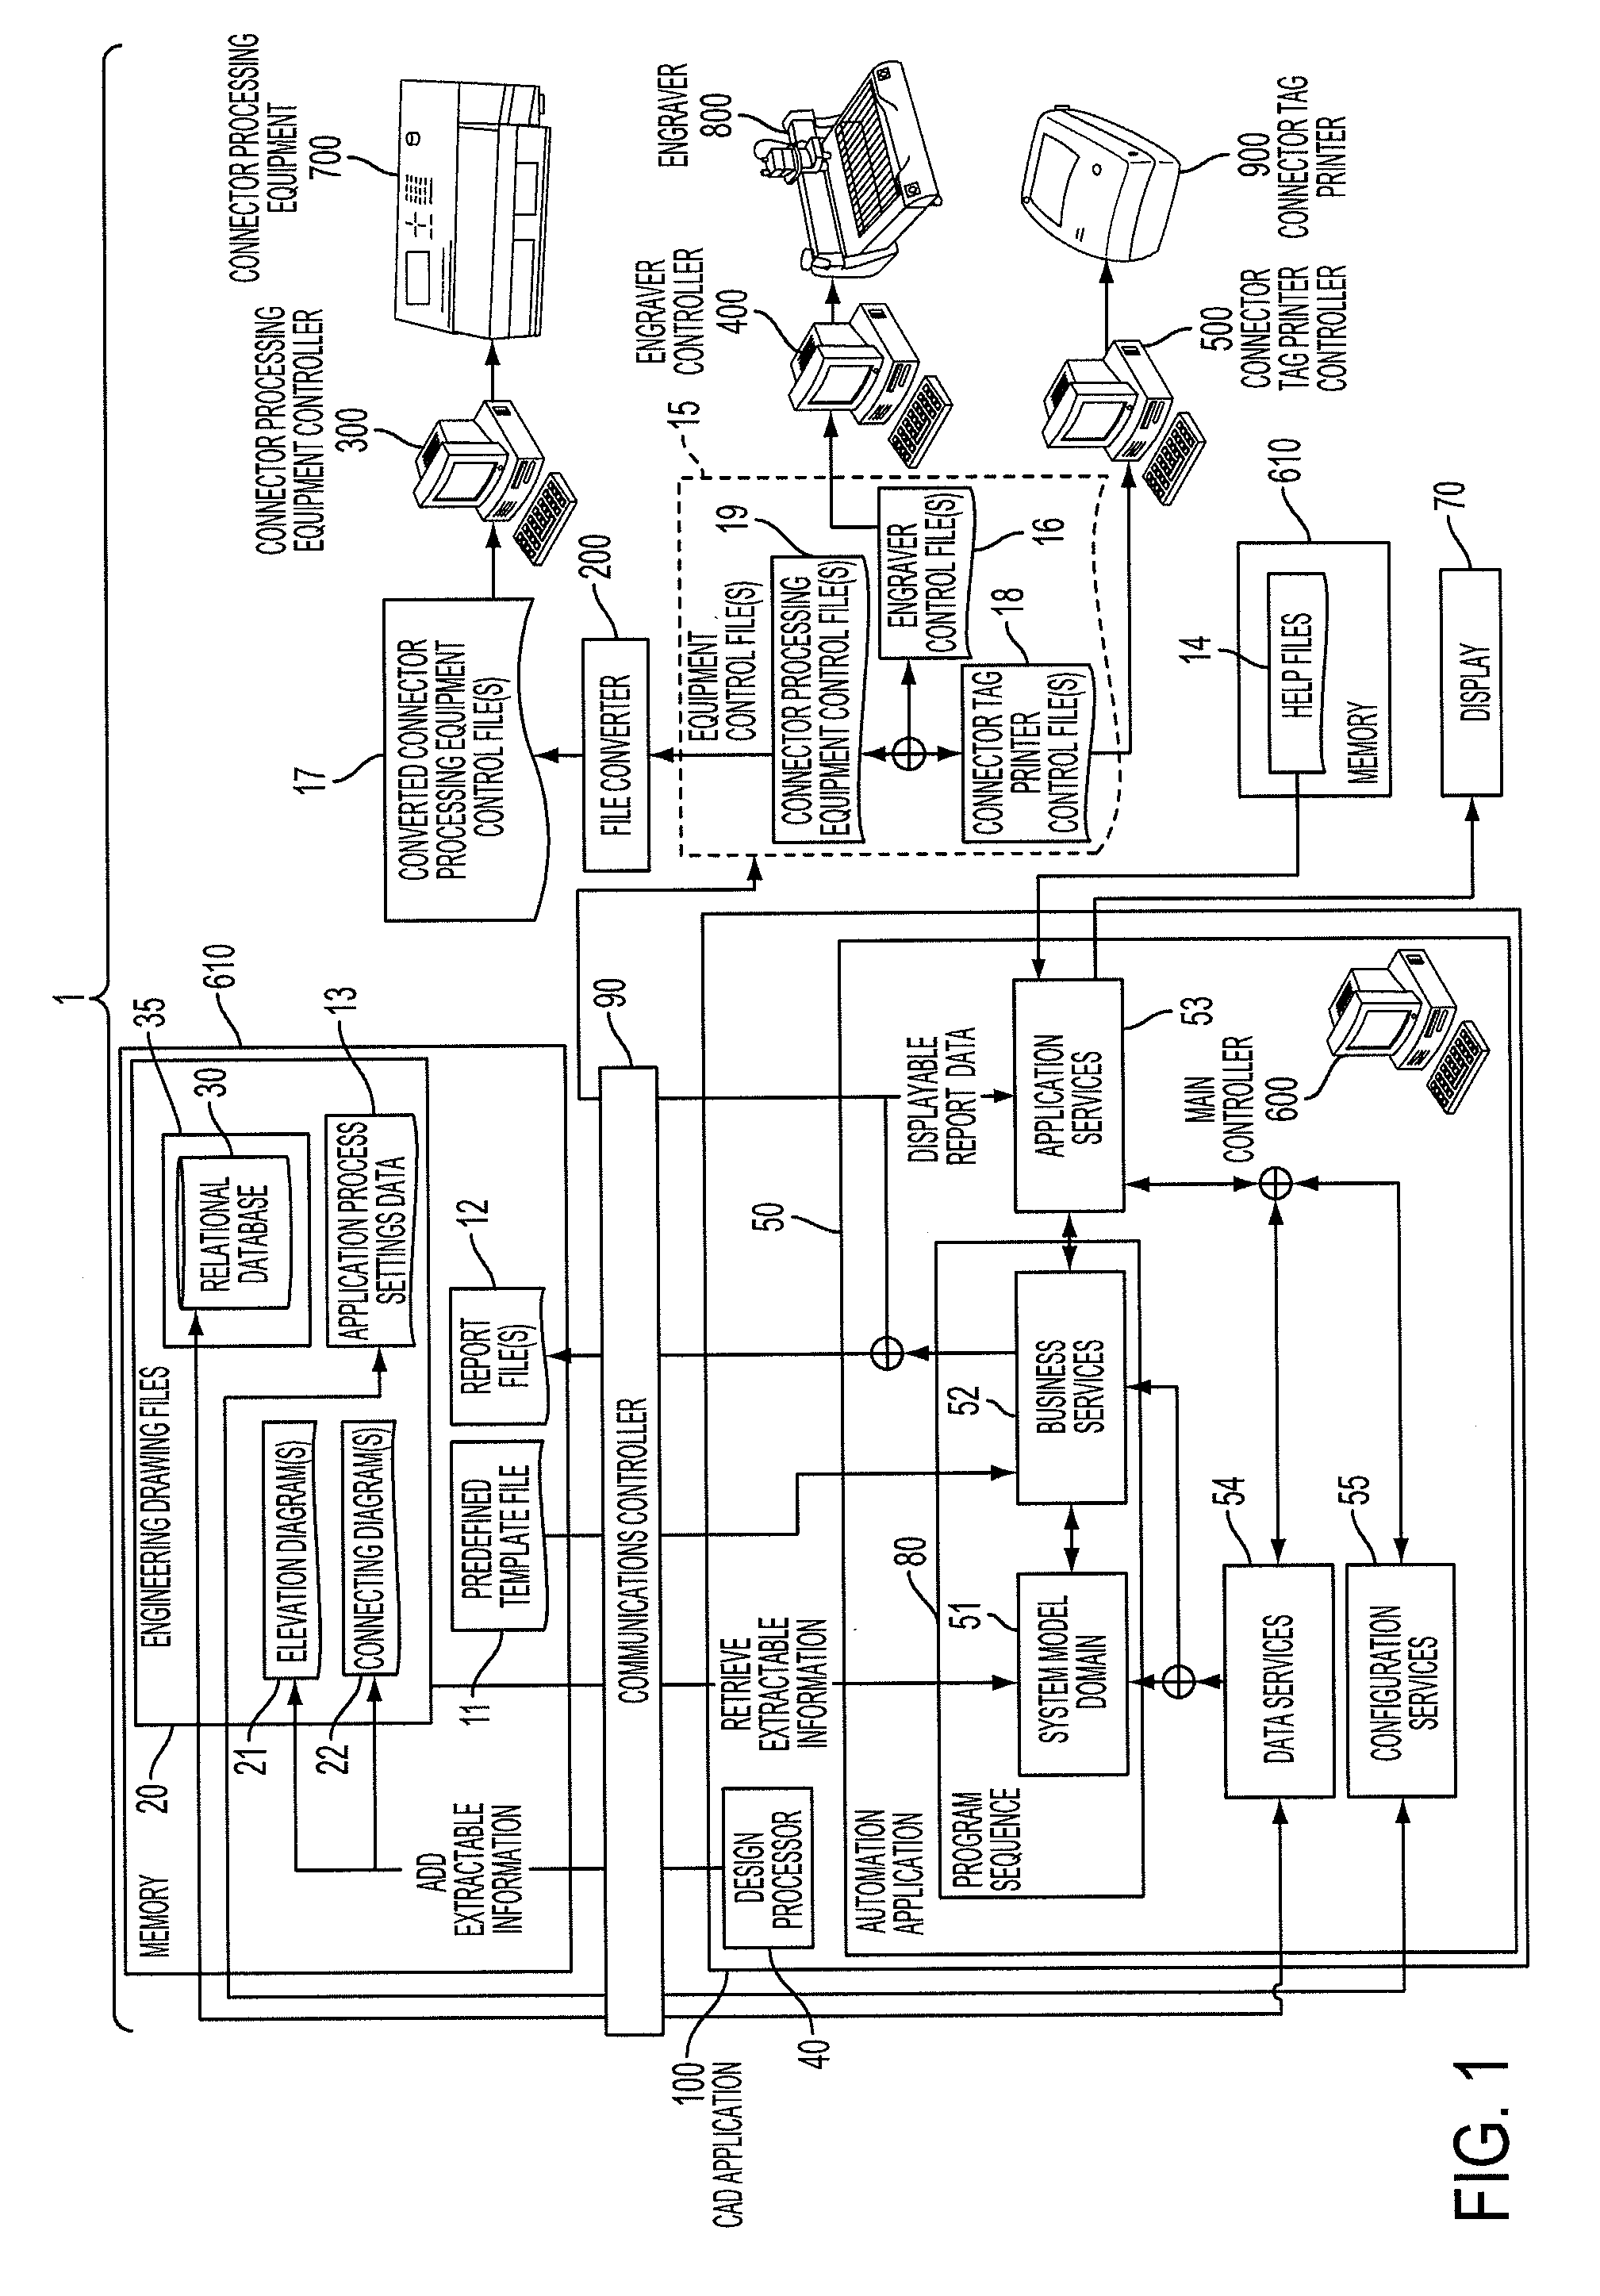 Method and automation system for processing information extractable from an engineering drawing file using information modeling and correlations to generate output data